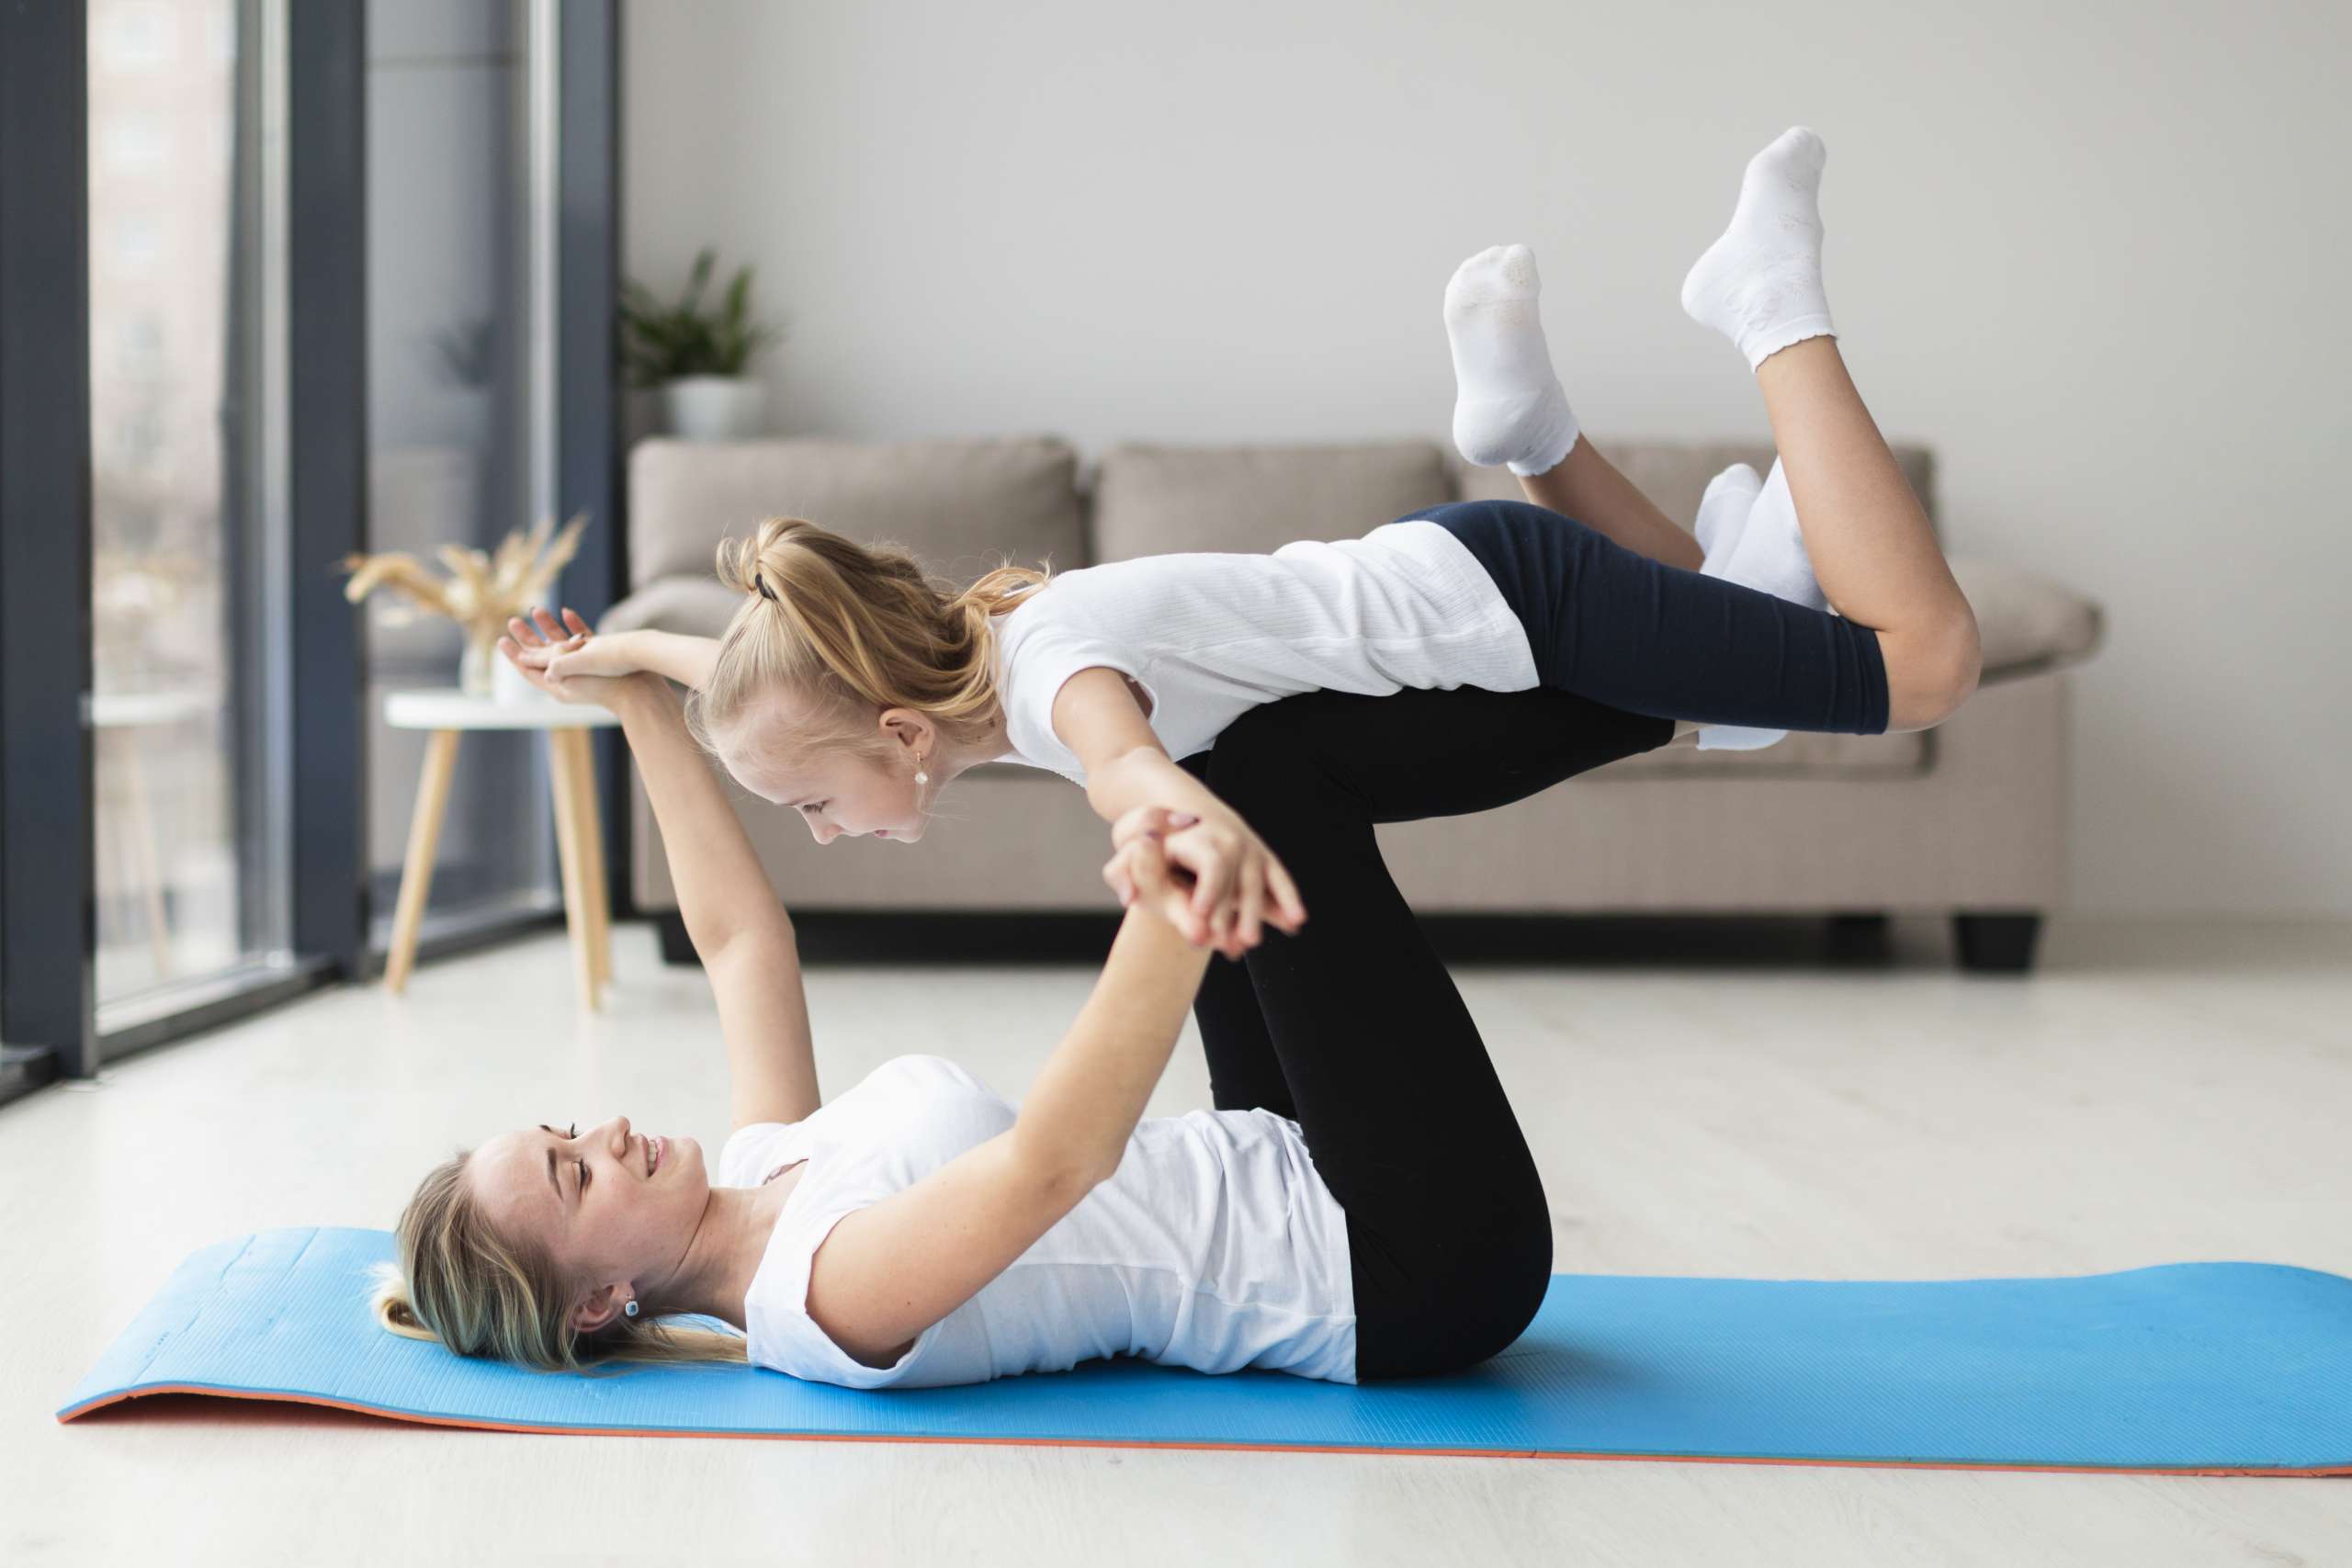 10 ideas for joint gymnastics with your child